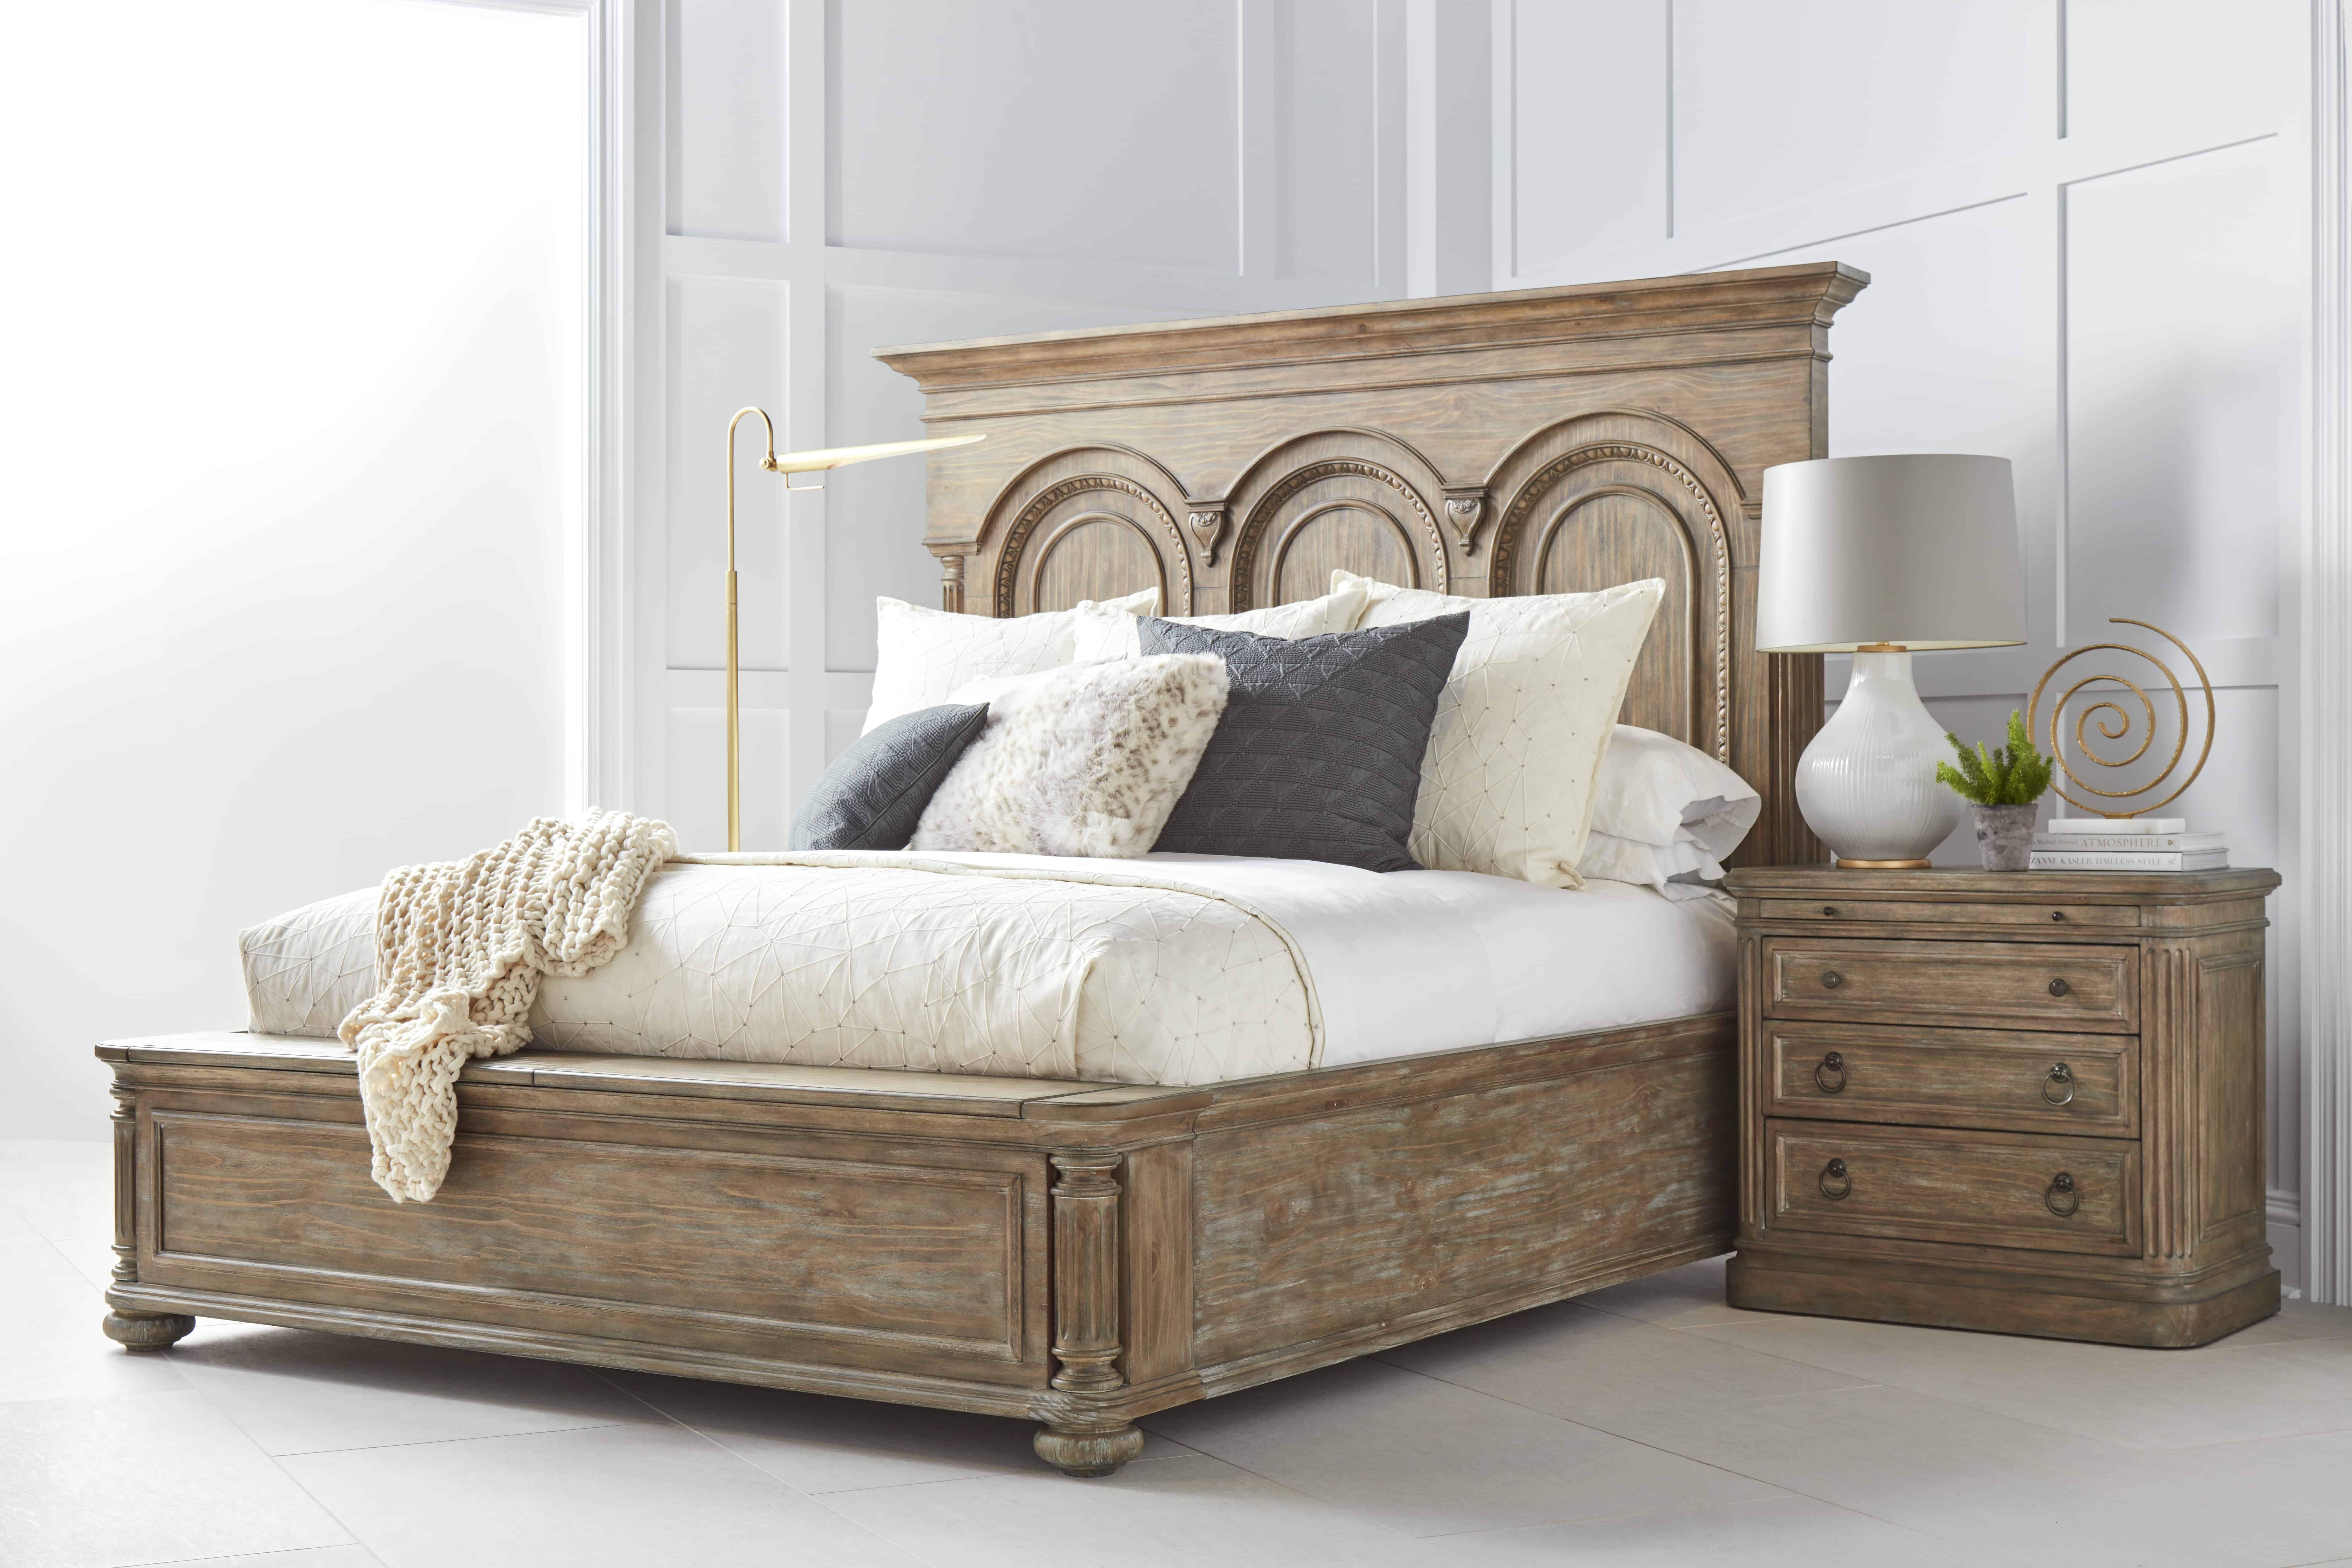 Architrave King Panel Bed Art Furniture, King Panel Bed